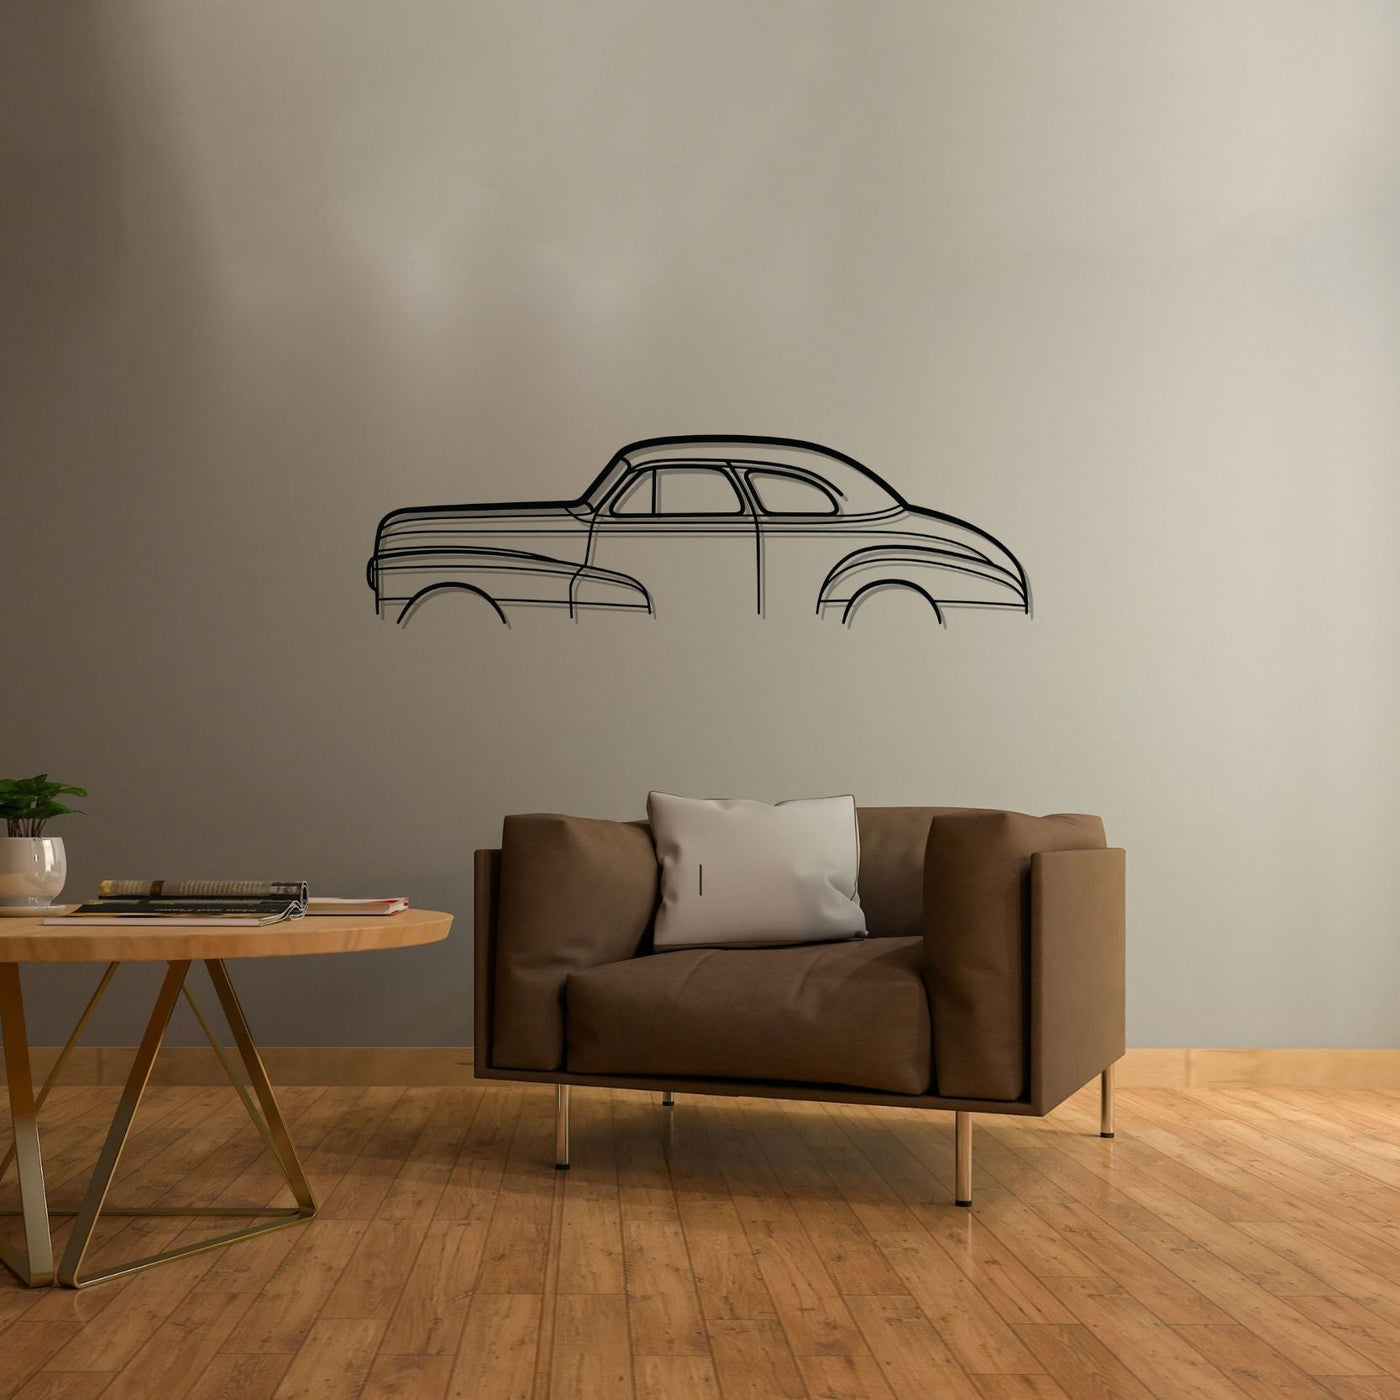 Stylemaster Coupe 1948 Classic Silhouette Metal Wall Art